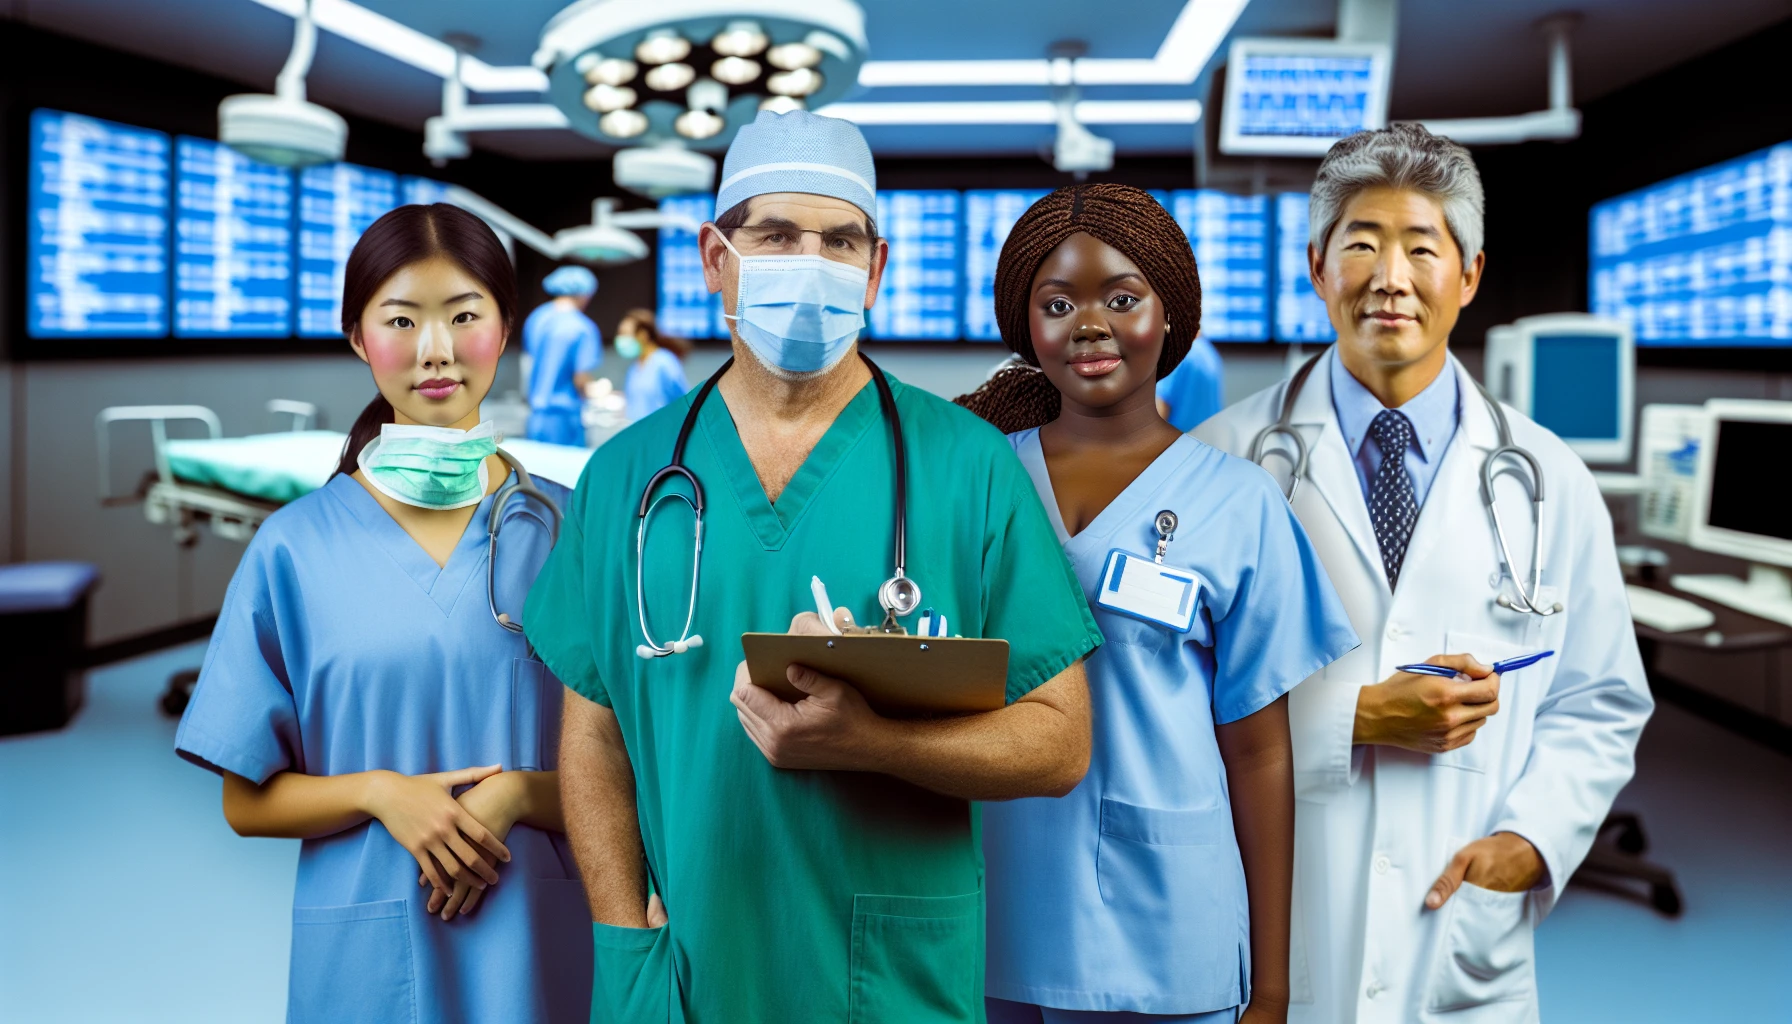 Medical professionals in a hospital setting